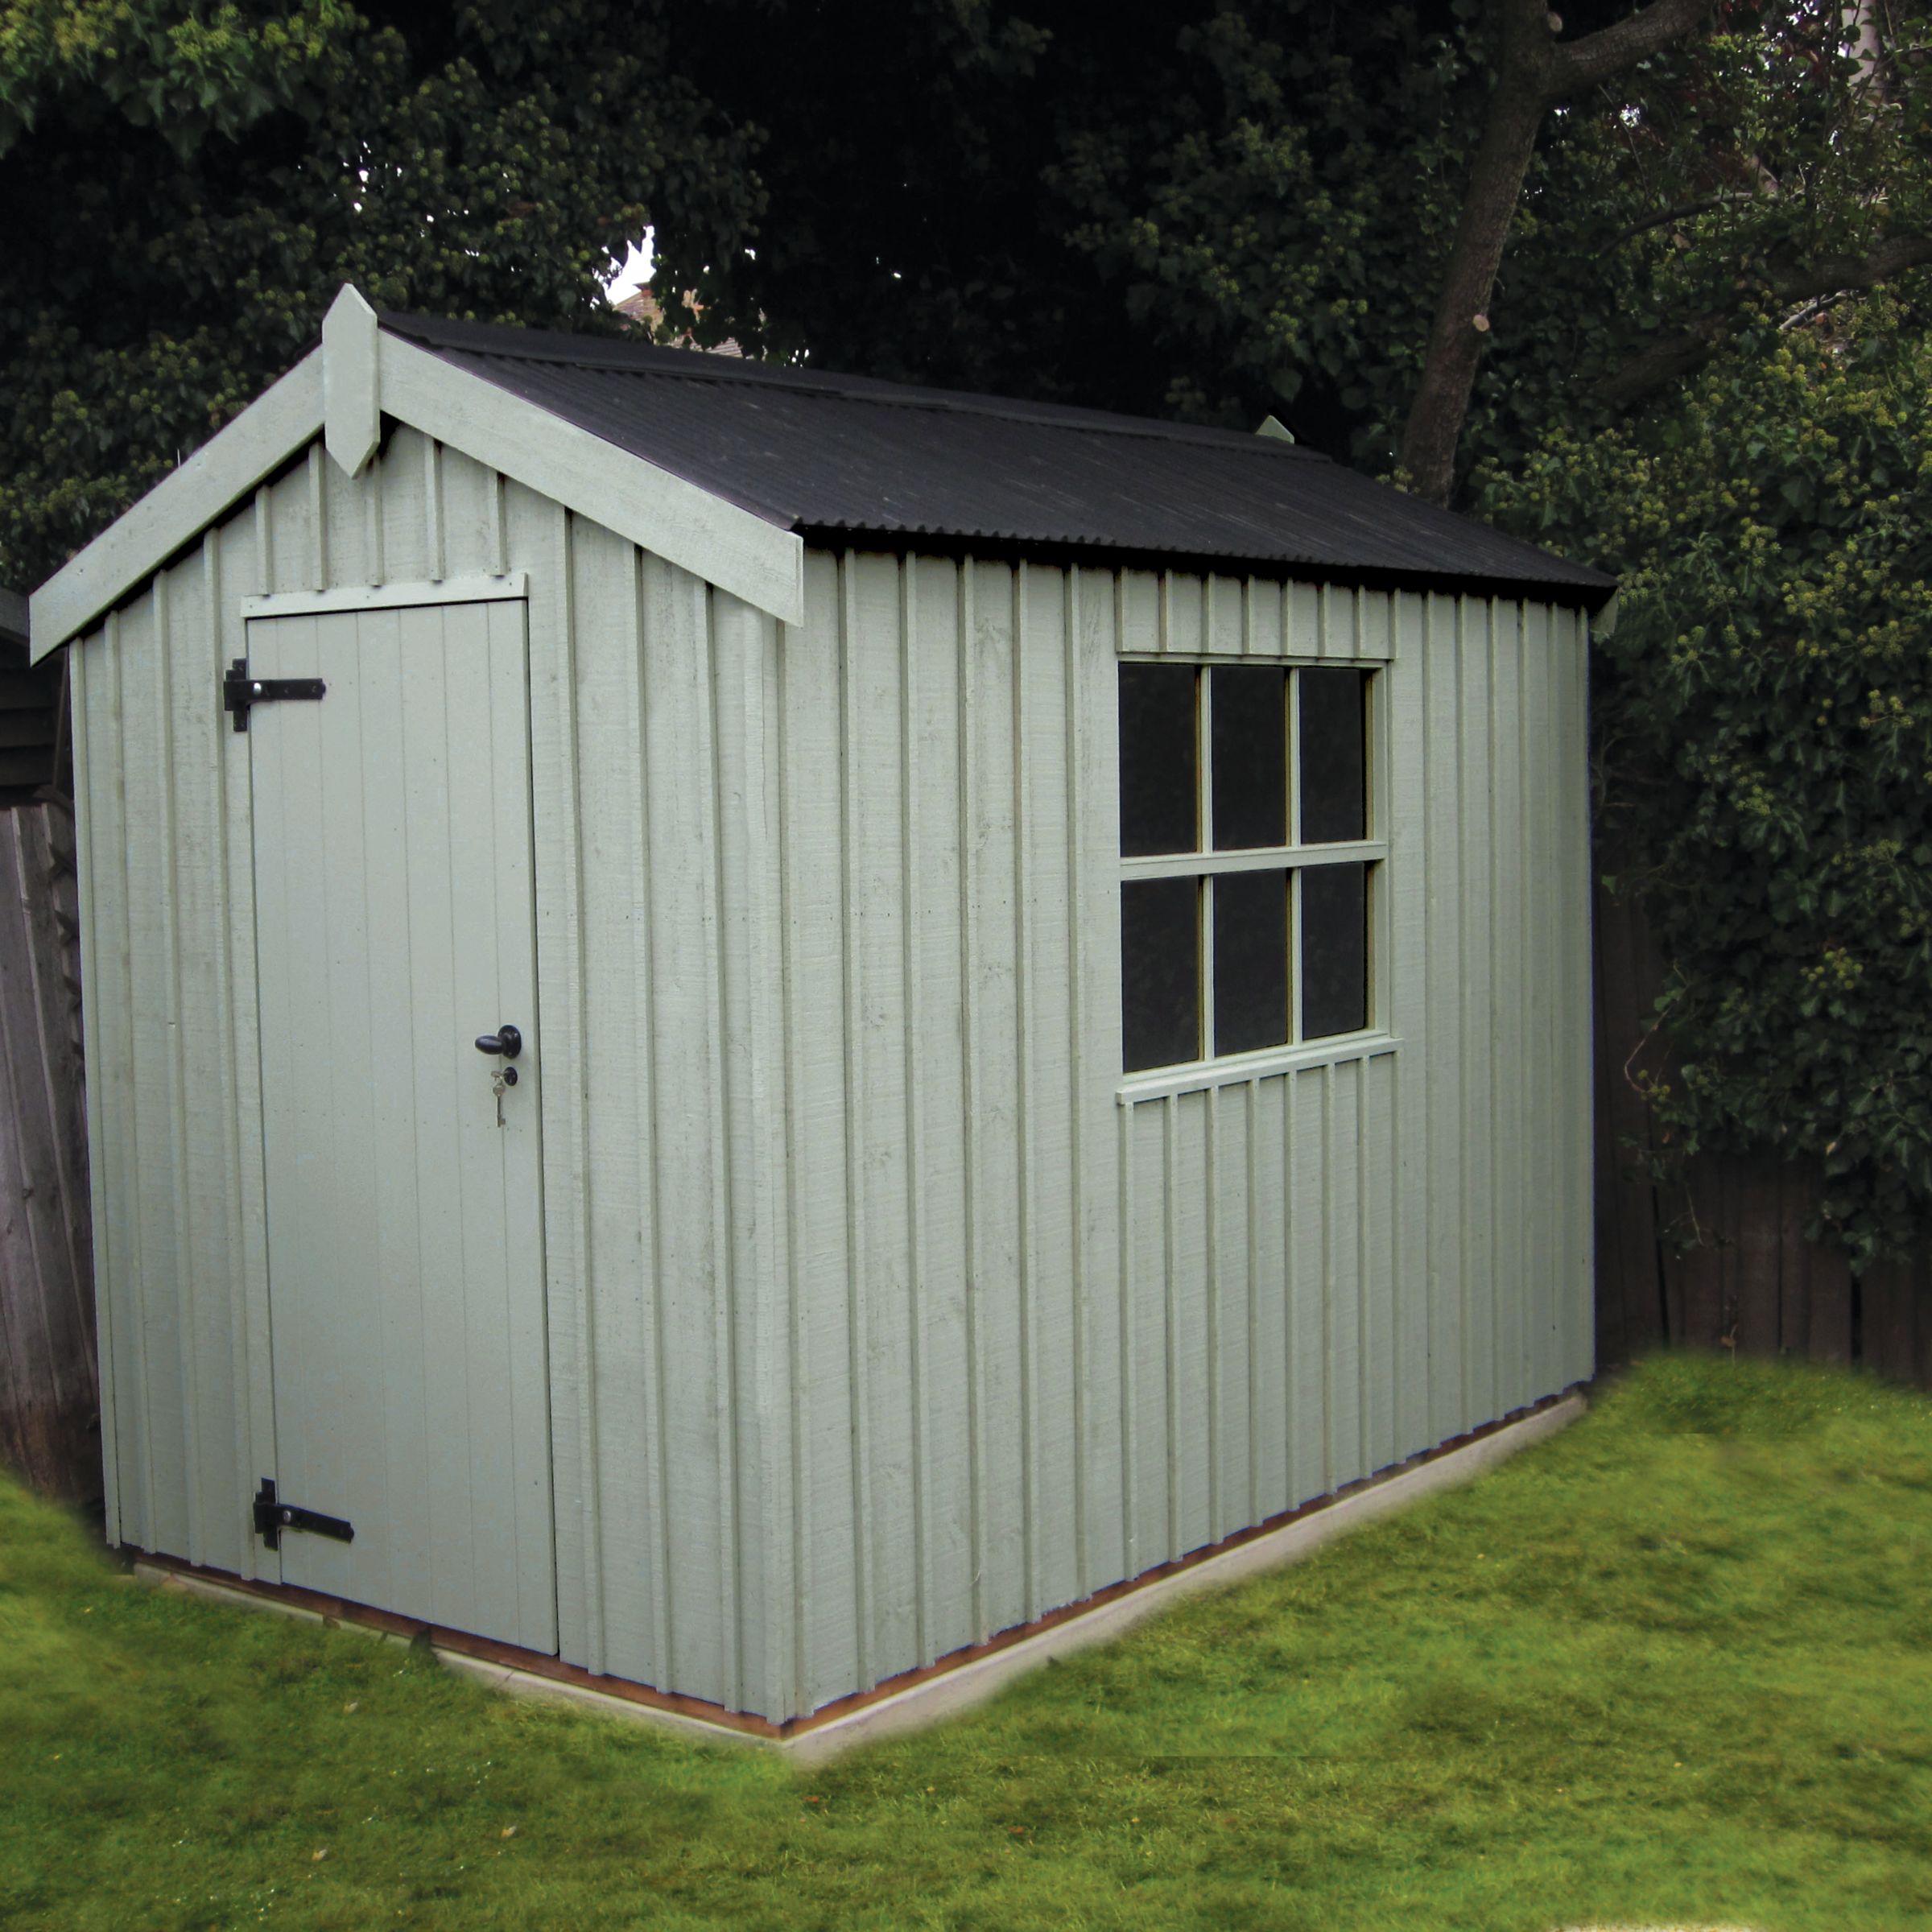 Buy National Trust by Crane Peckover Garden Shed, 1.8 x 2 